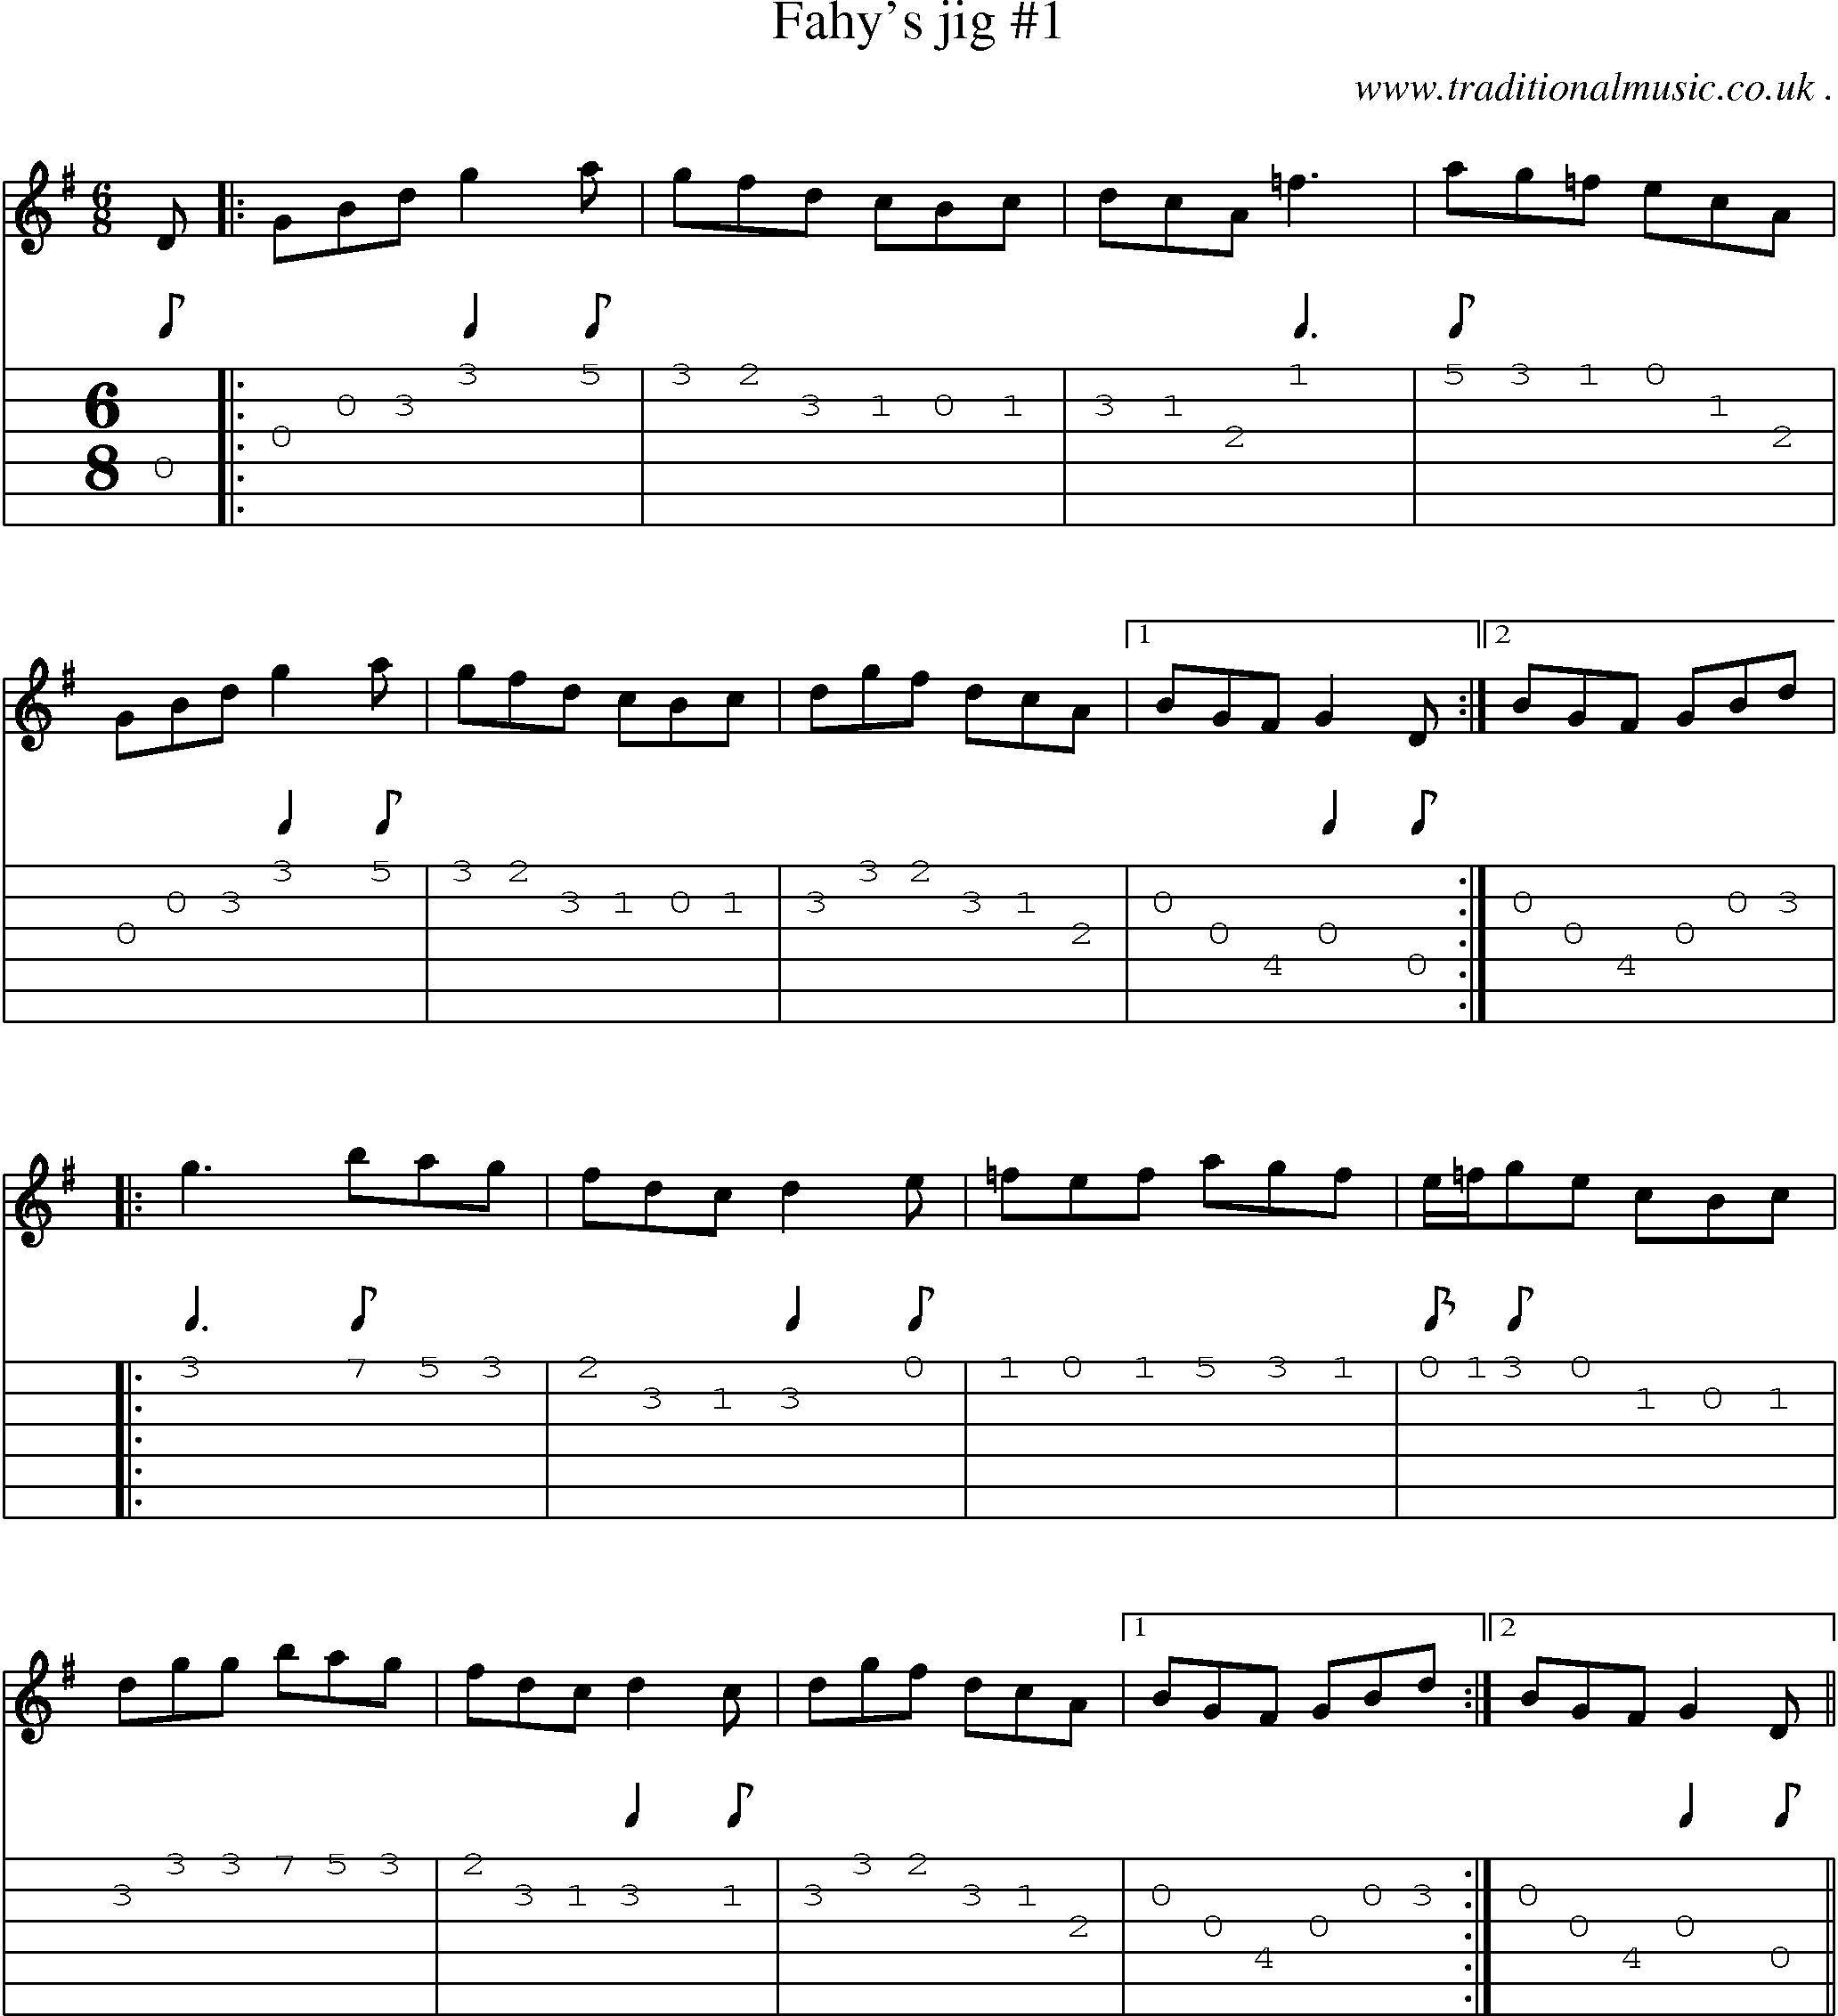 Sheet-Music and Guitar Tabs for Fahys Jig 1